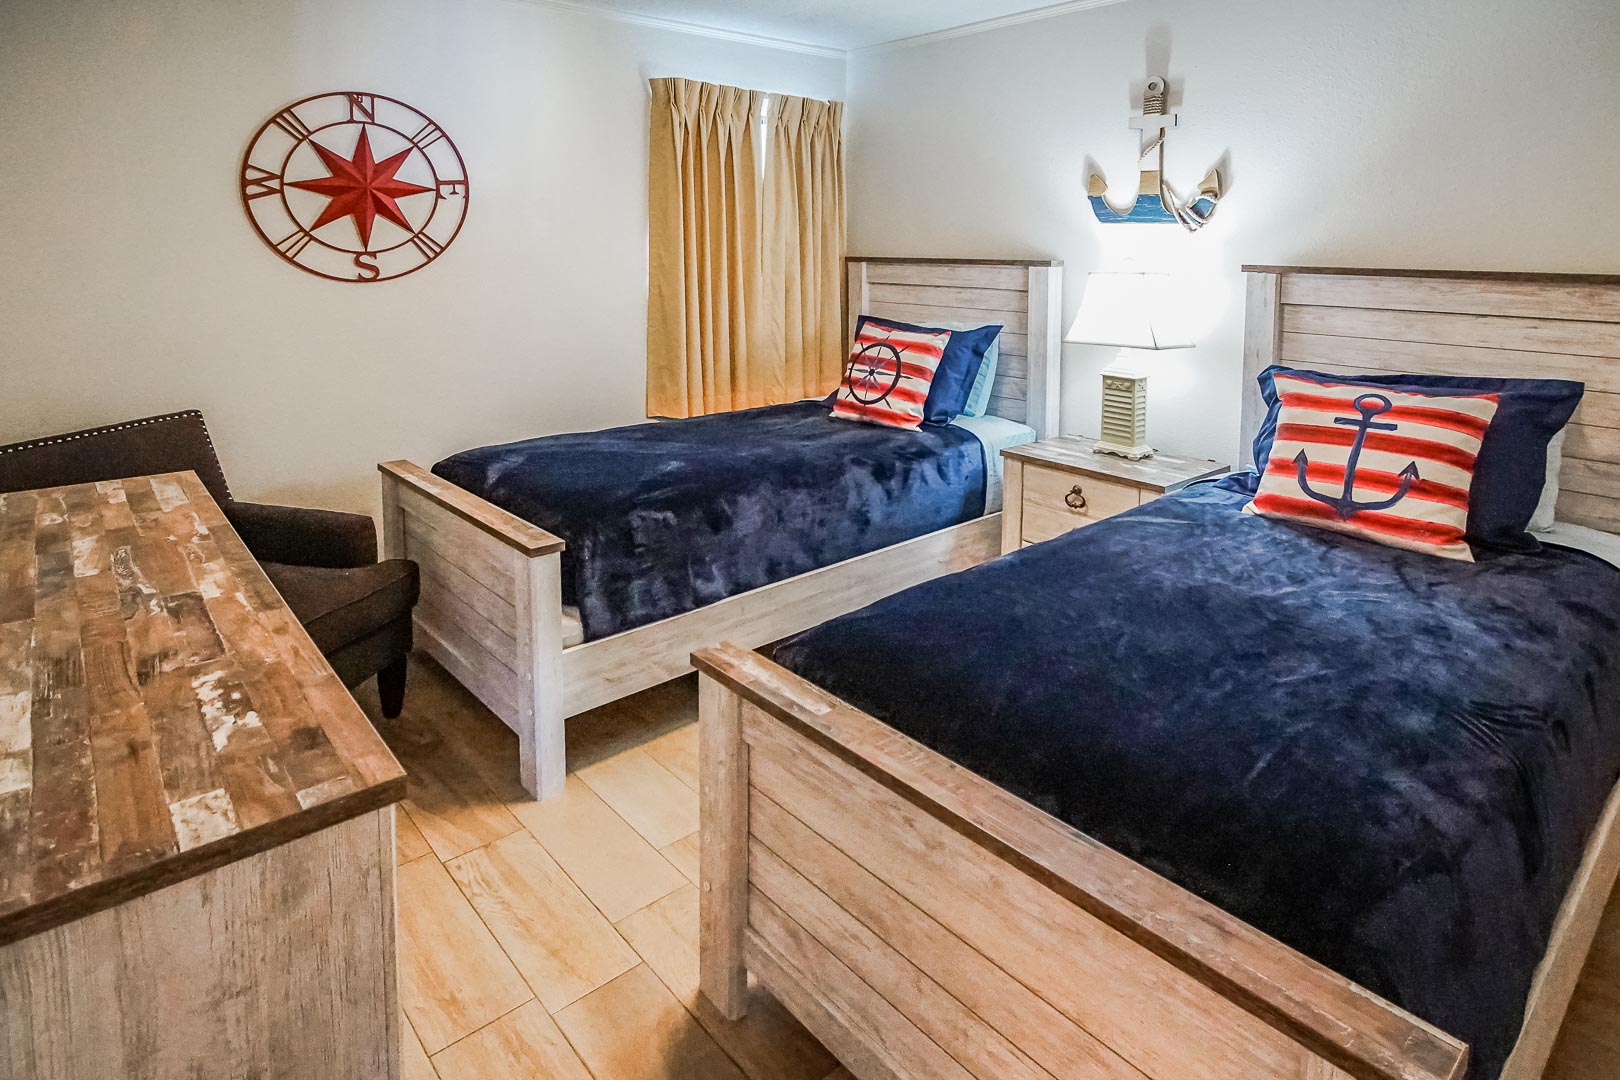 A spacious bedroom with double beds at VRI's Shoreline Towers in Gulf Shores, Alabama.